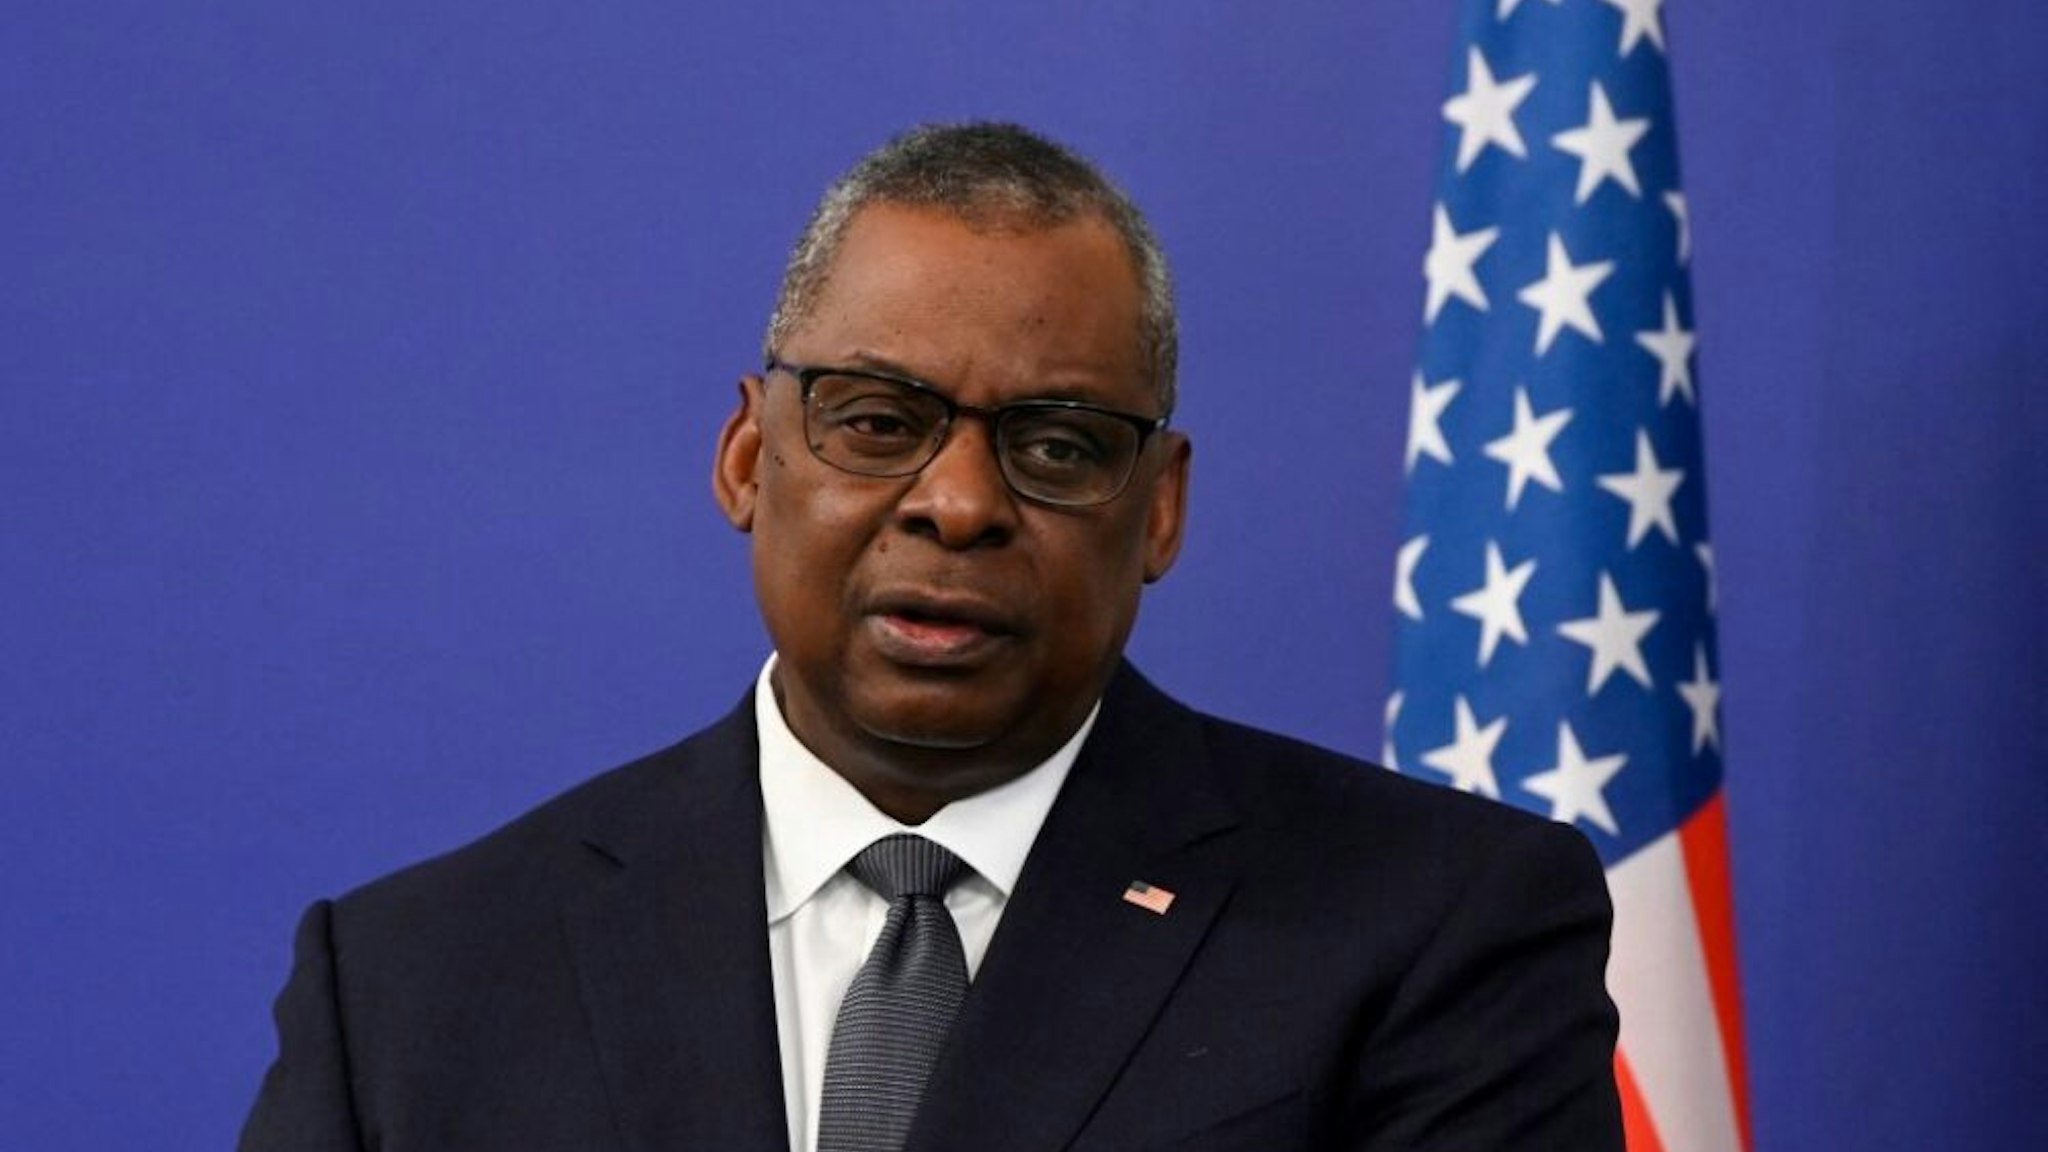 US Secretary of Defence Lloyd Austin speaks during a joint press conference with Bulgarian Prime Minister in Sofia, on March 19, 2022.